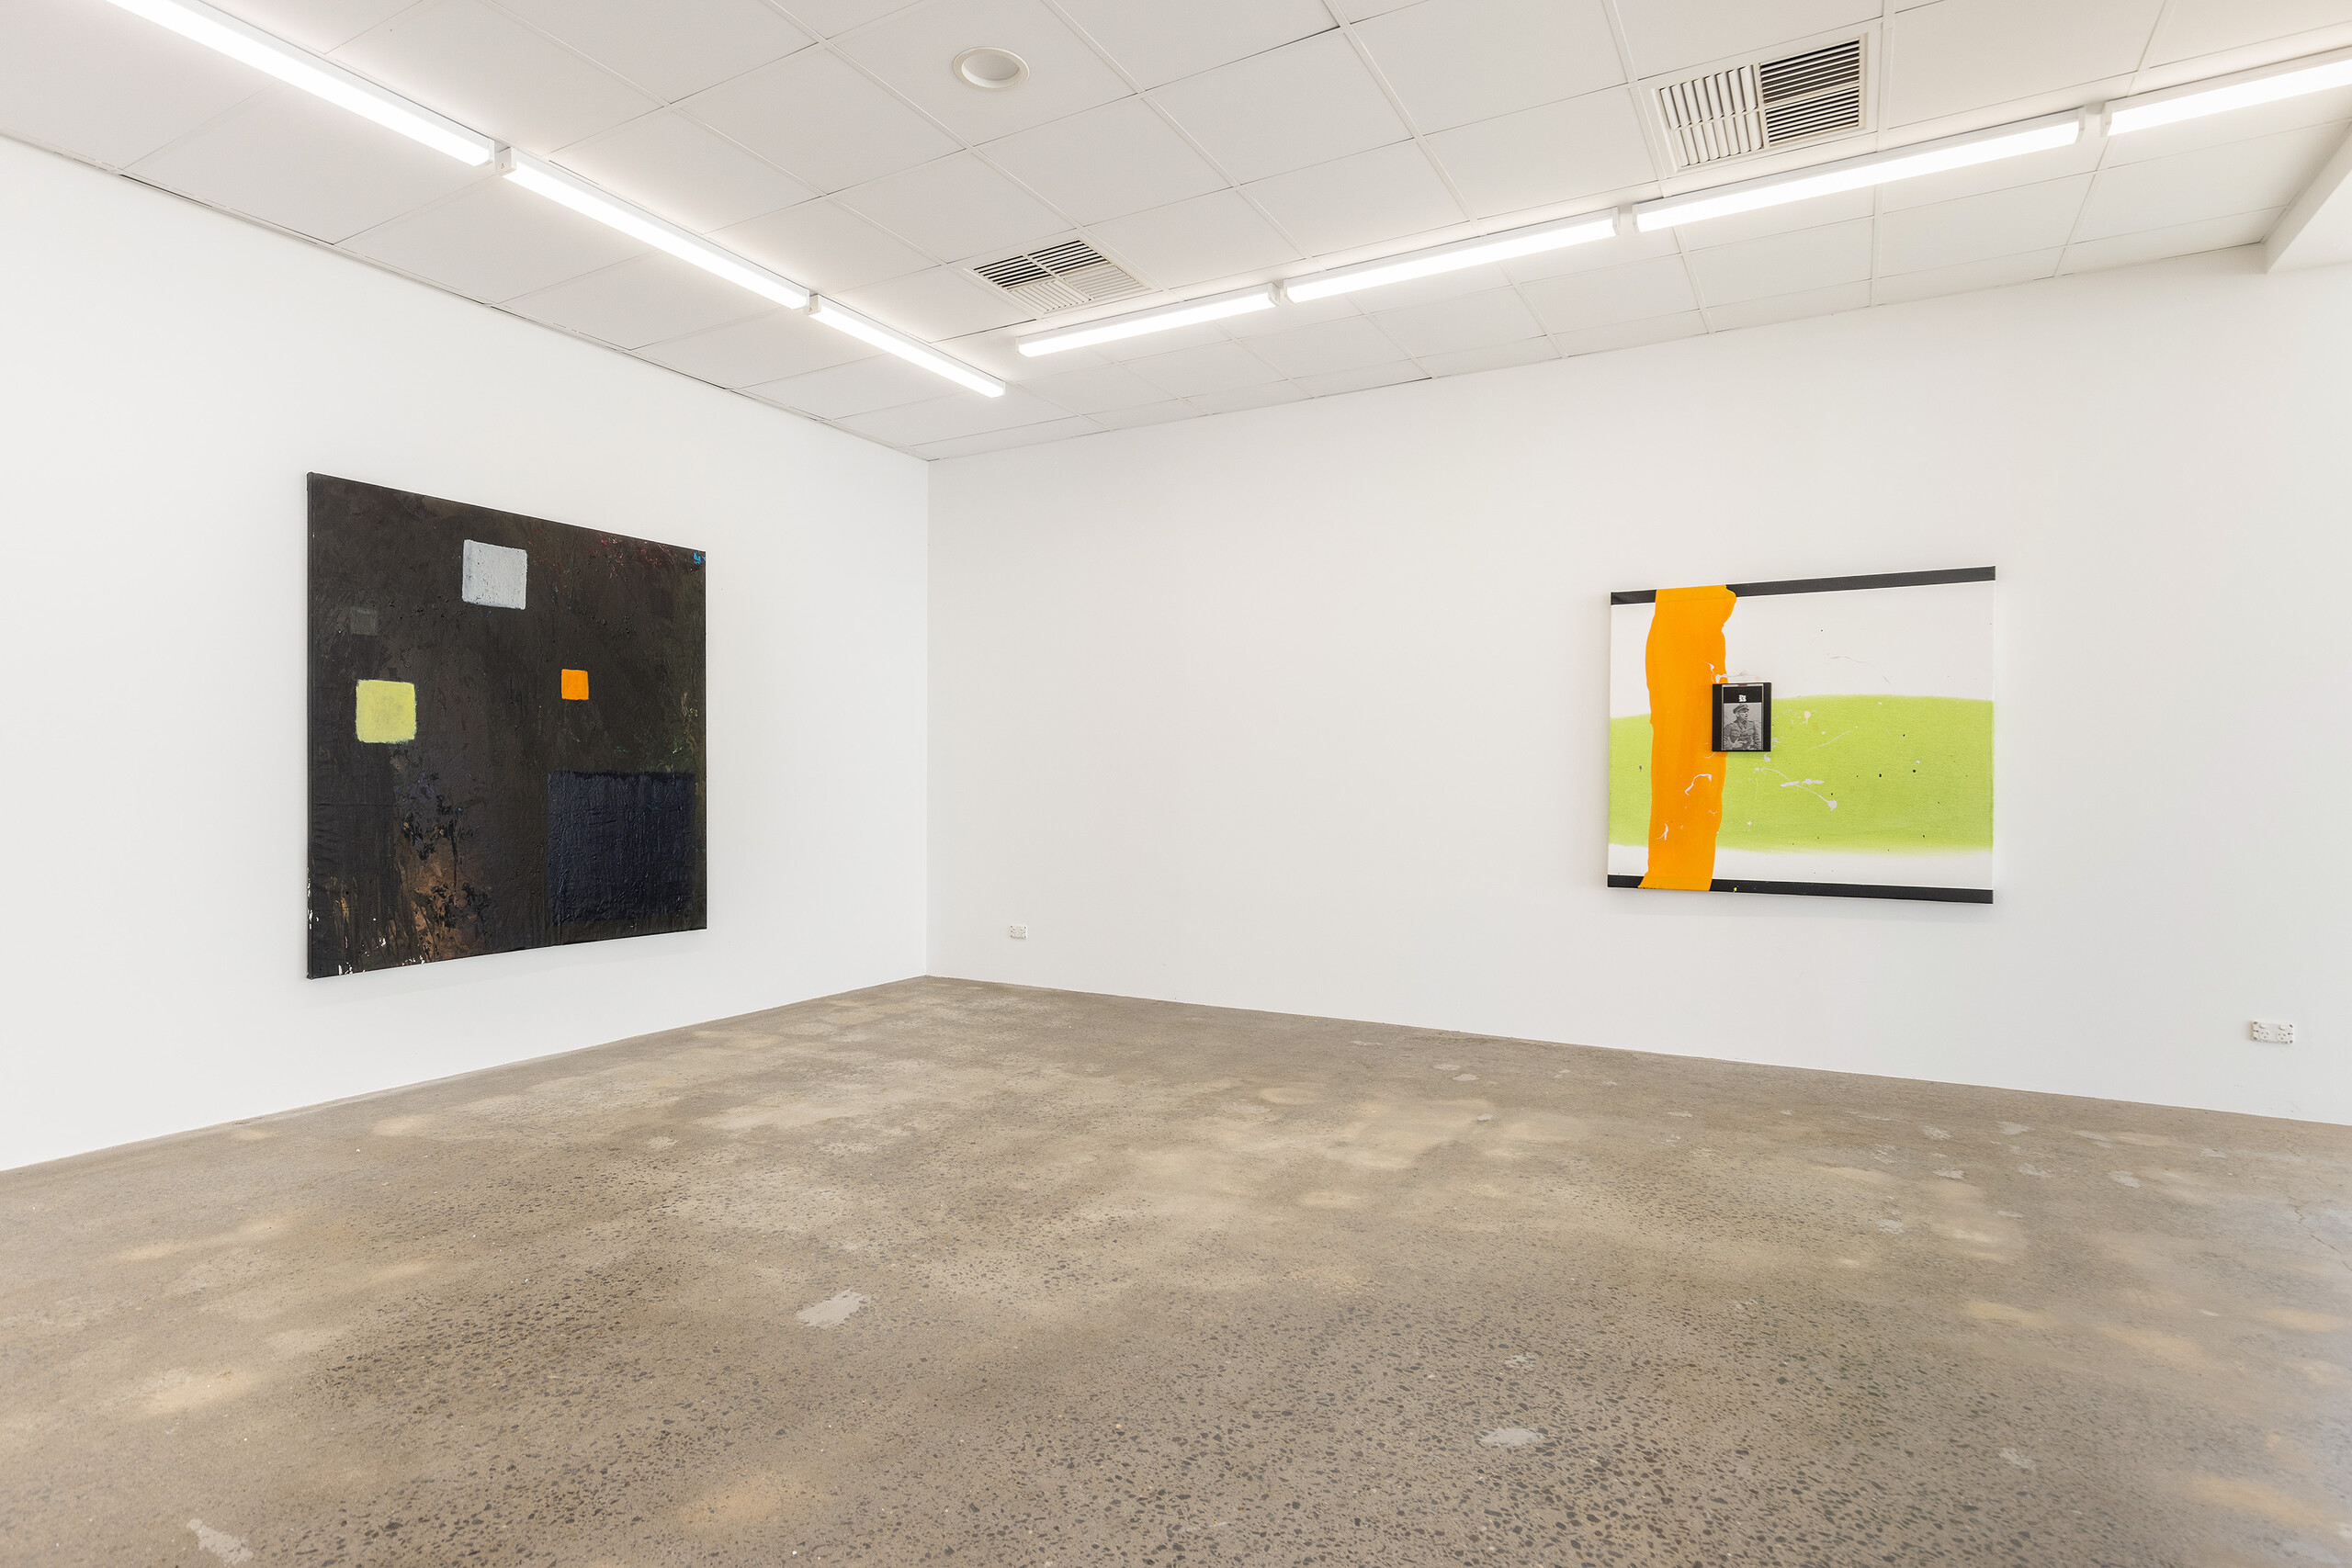 Installation view of Josh Krum, left to right: <em>Factory,</em> 2022, oil and acrylic on canvas, 180 x 170 cm and <em>Dawn,</em> 2022, oil, enamel and book on canvas, 129 x 139.5 cm, NAP Contemporary. Photo: Vision House Photography